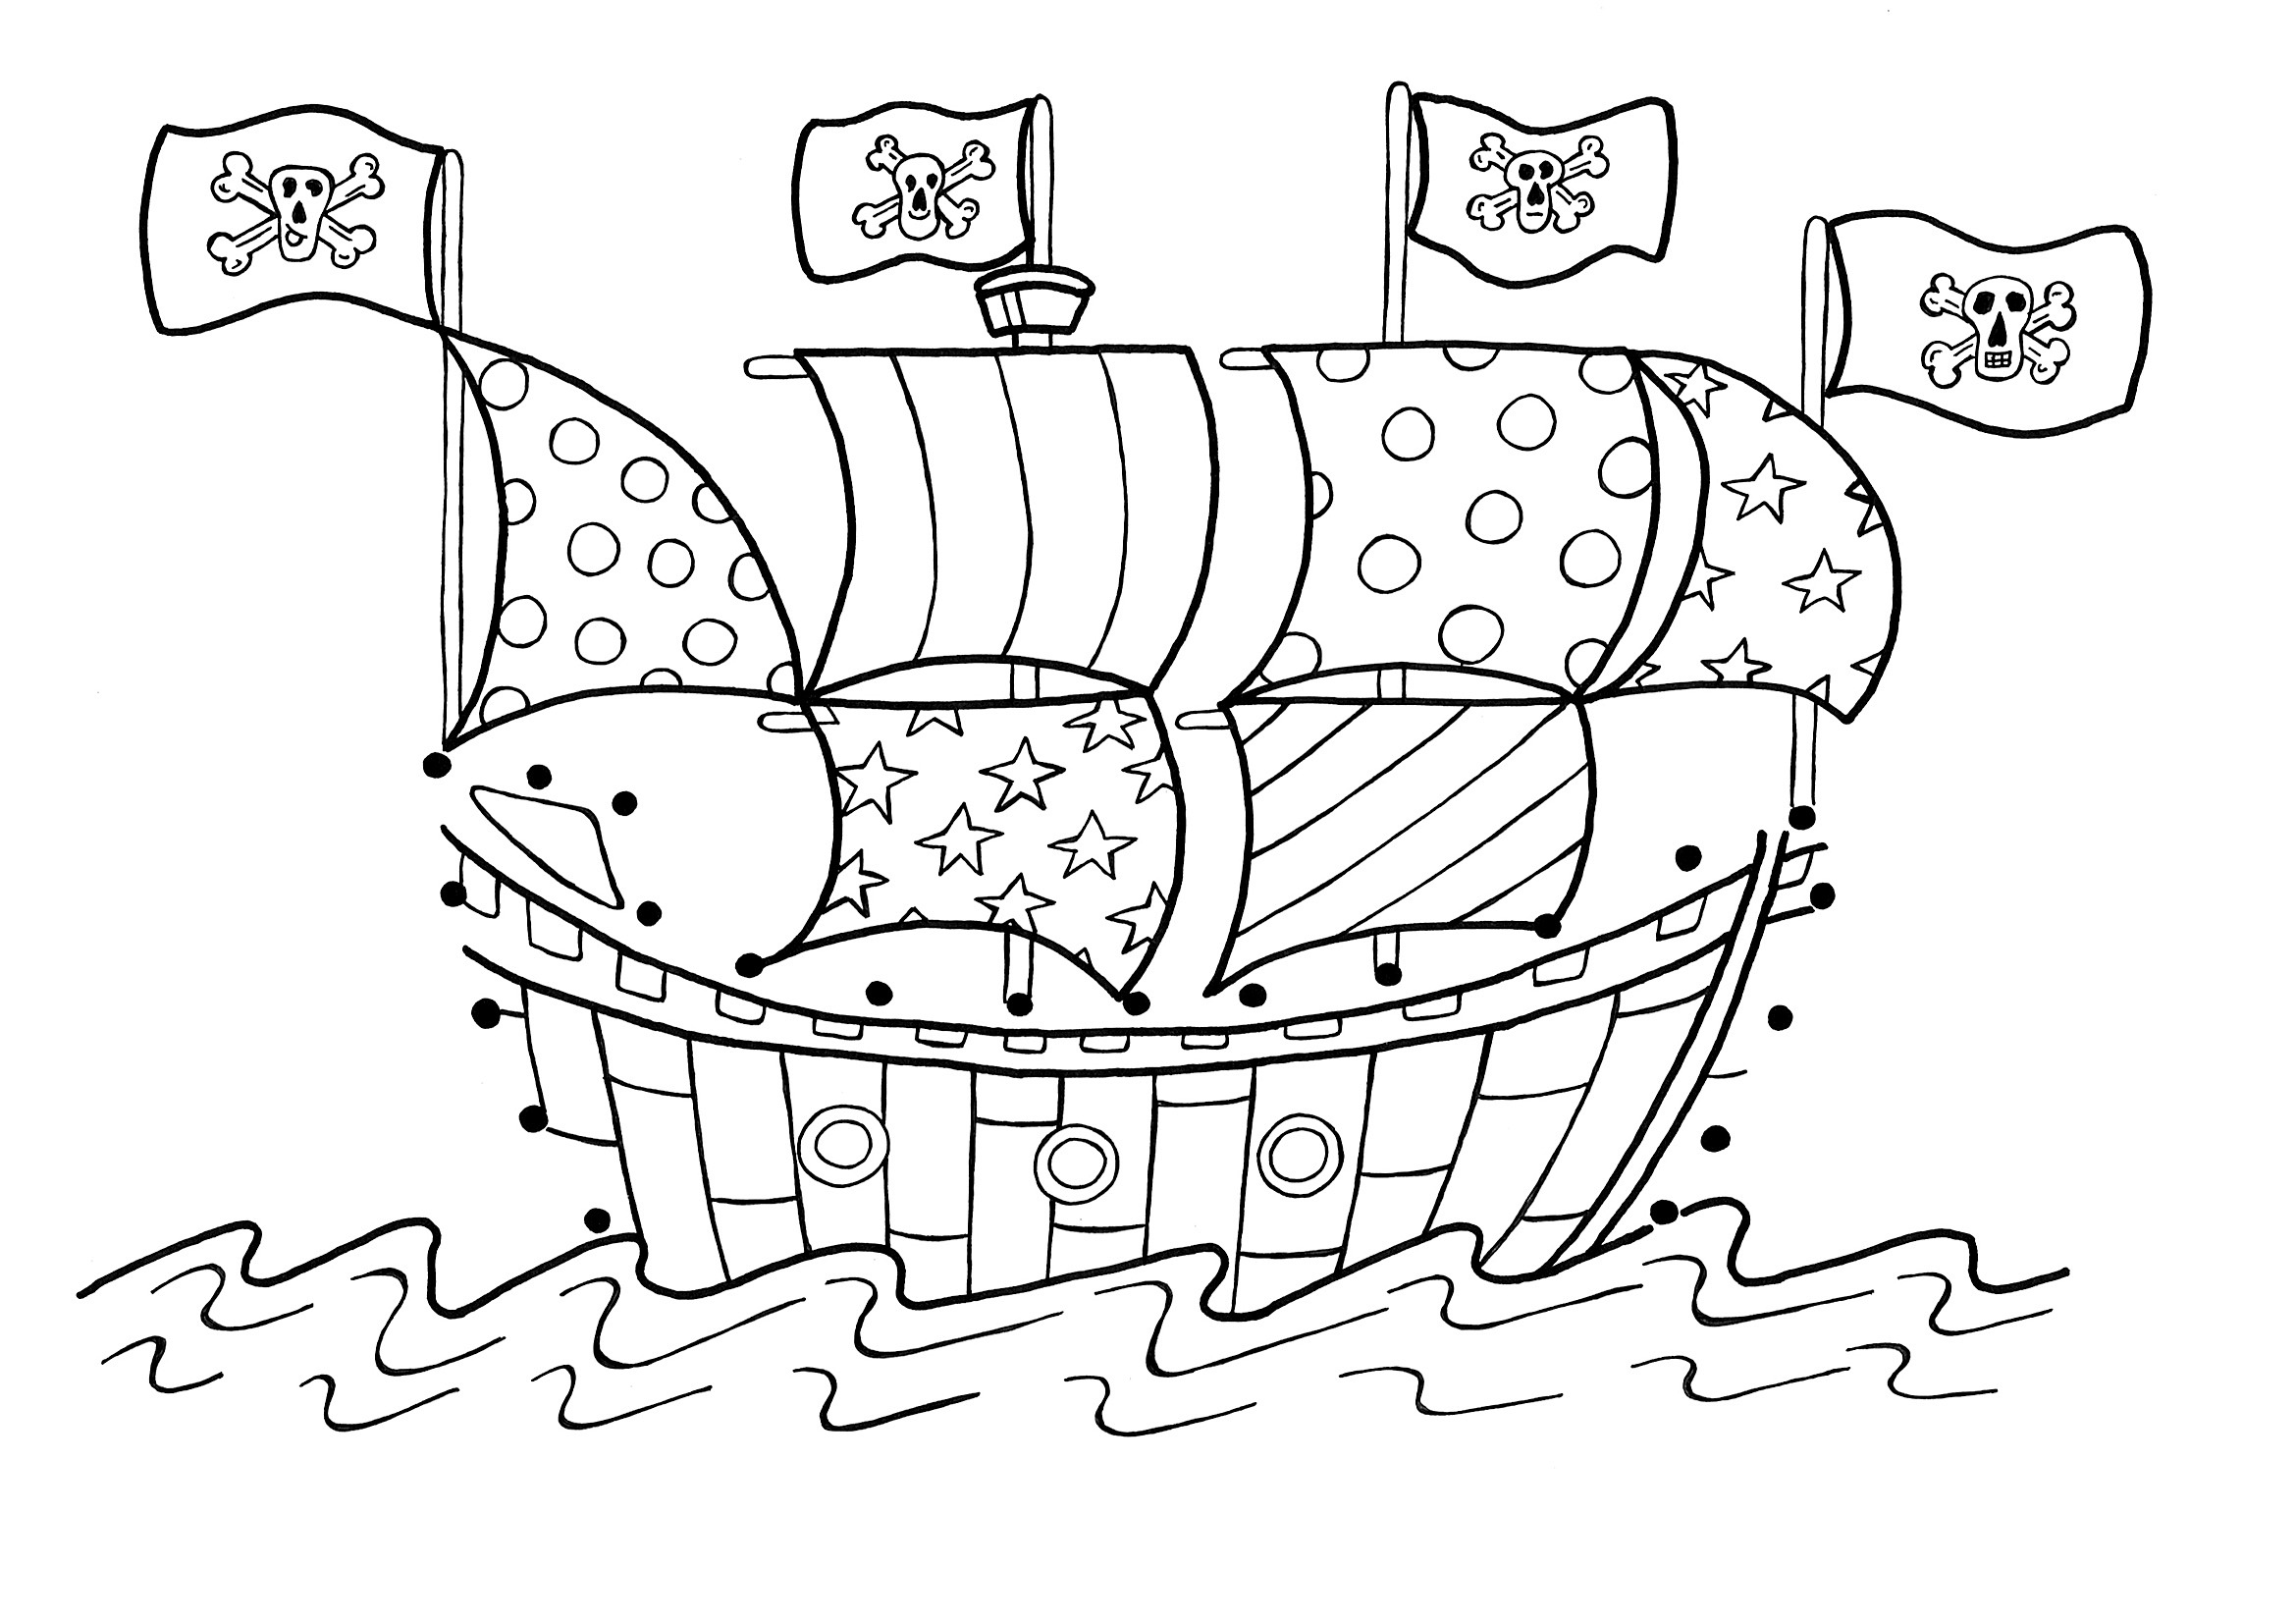 sunken pirate ship coloring pages